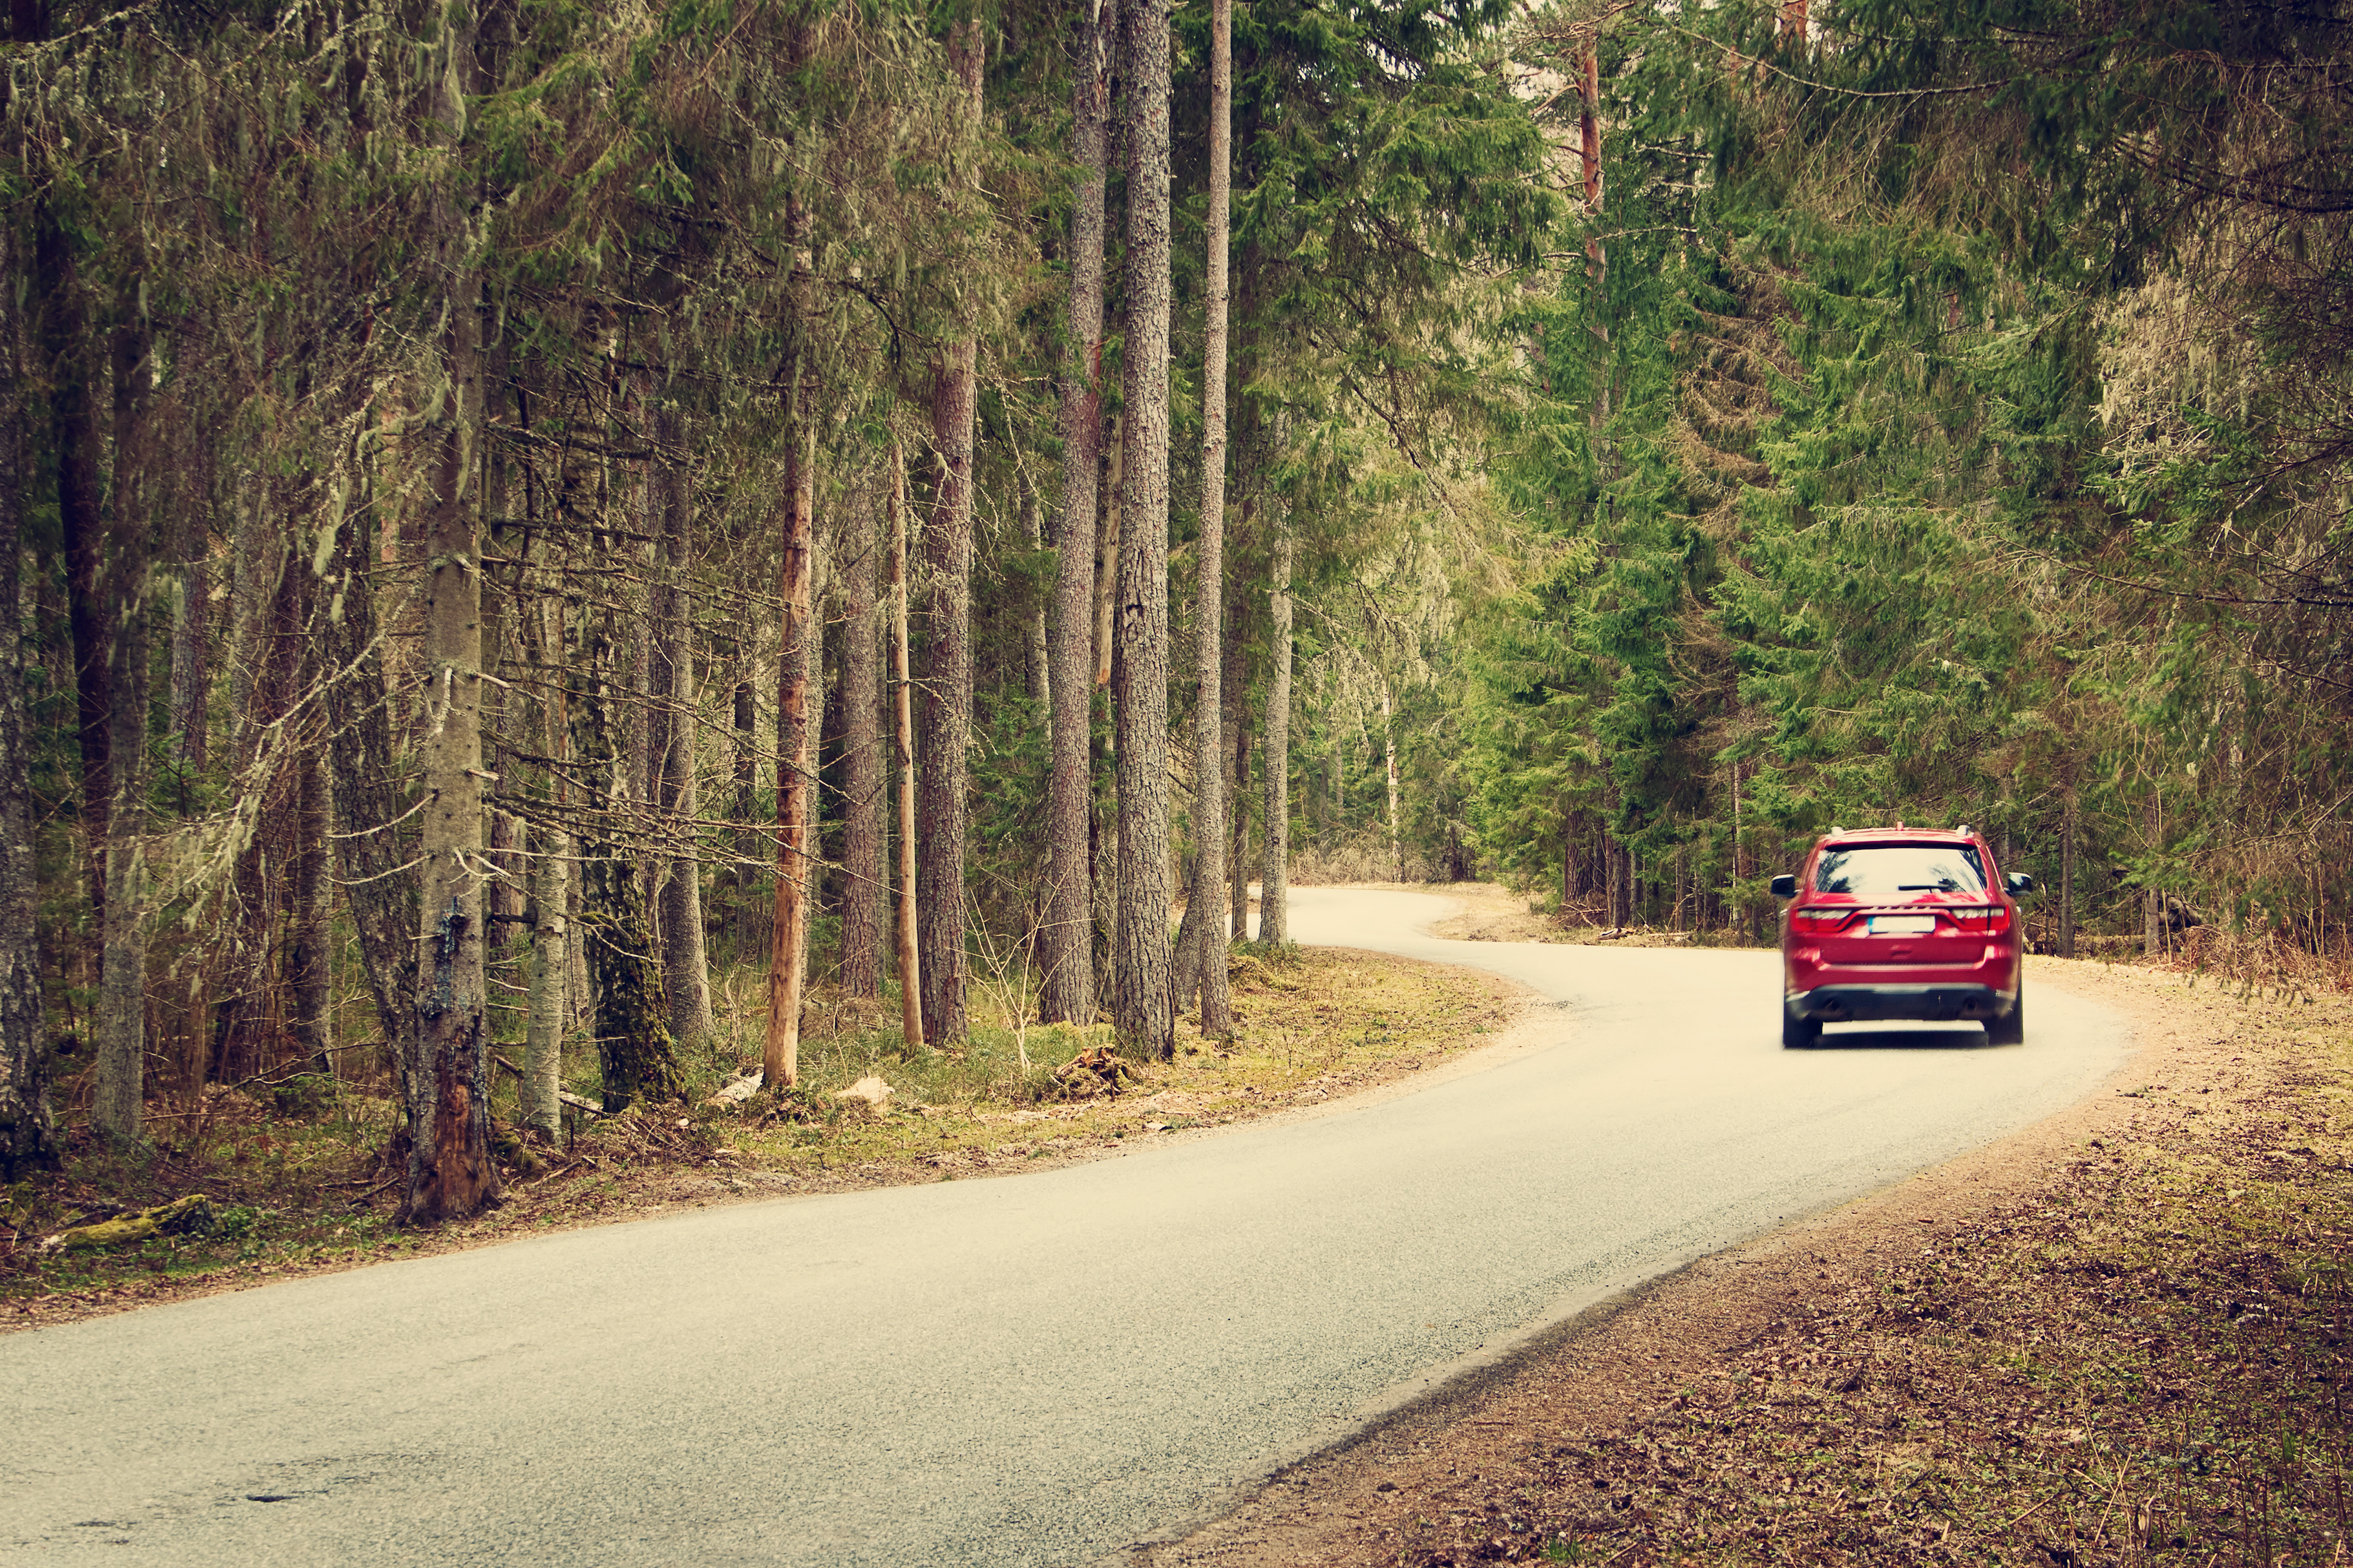 Car drives in the forest | Source: Shutterstock.com